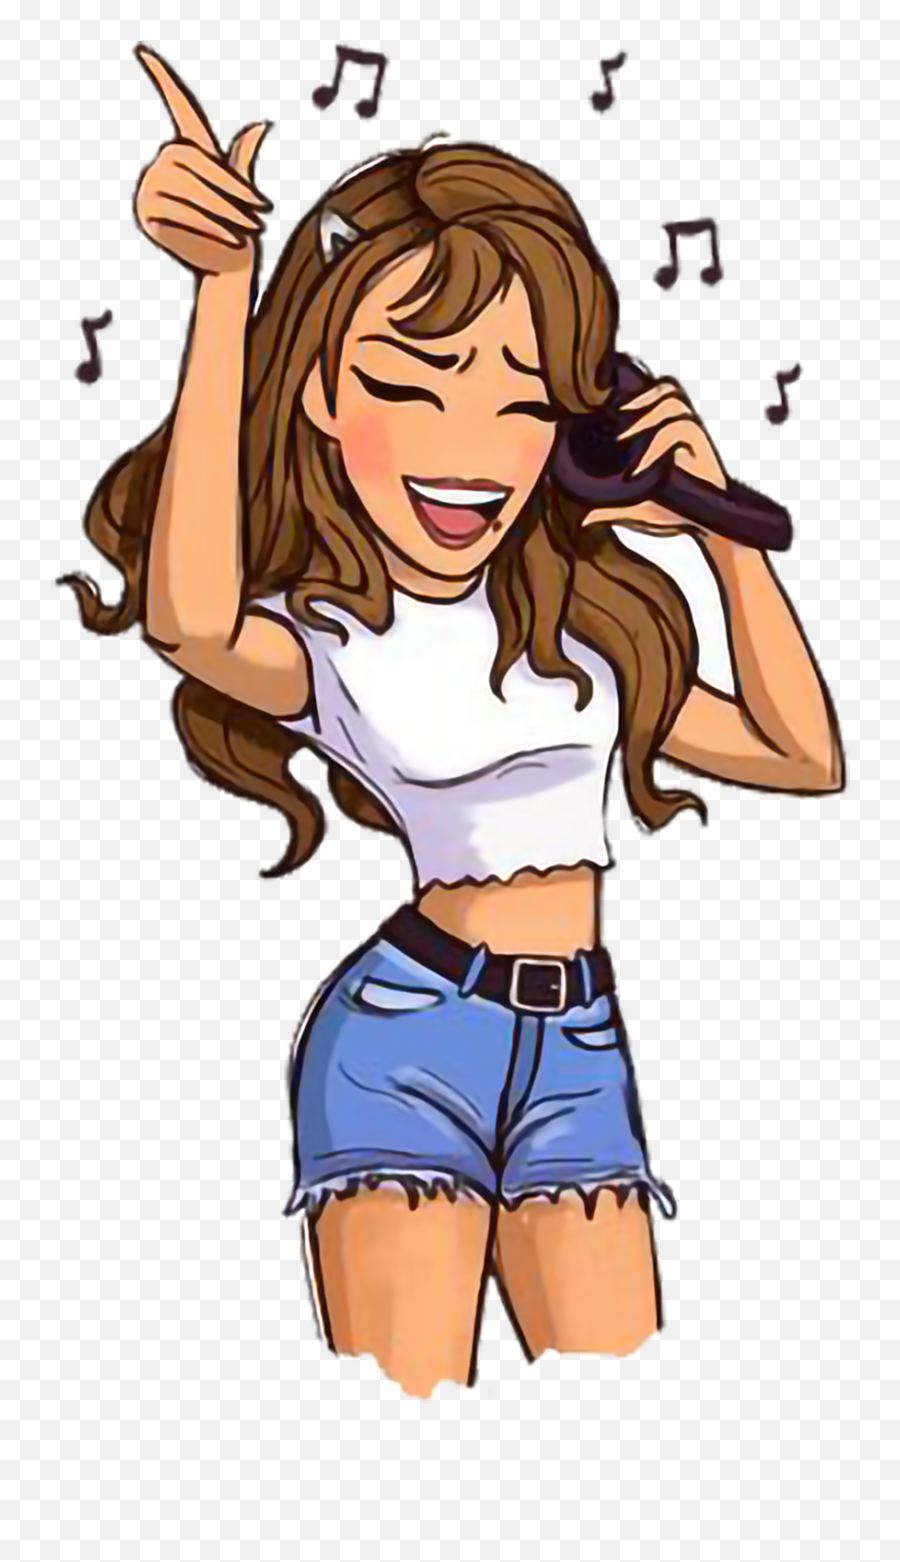 Mariah Carey Ideas In 2021 - Mariah Carey Sticker Emoji,Who Is The Dude With The Curly Long Hair And Mariah Careys Video Emotions